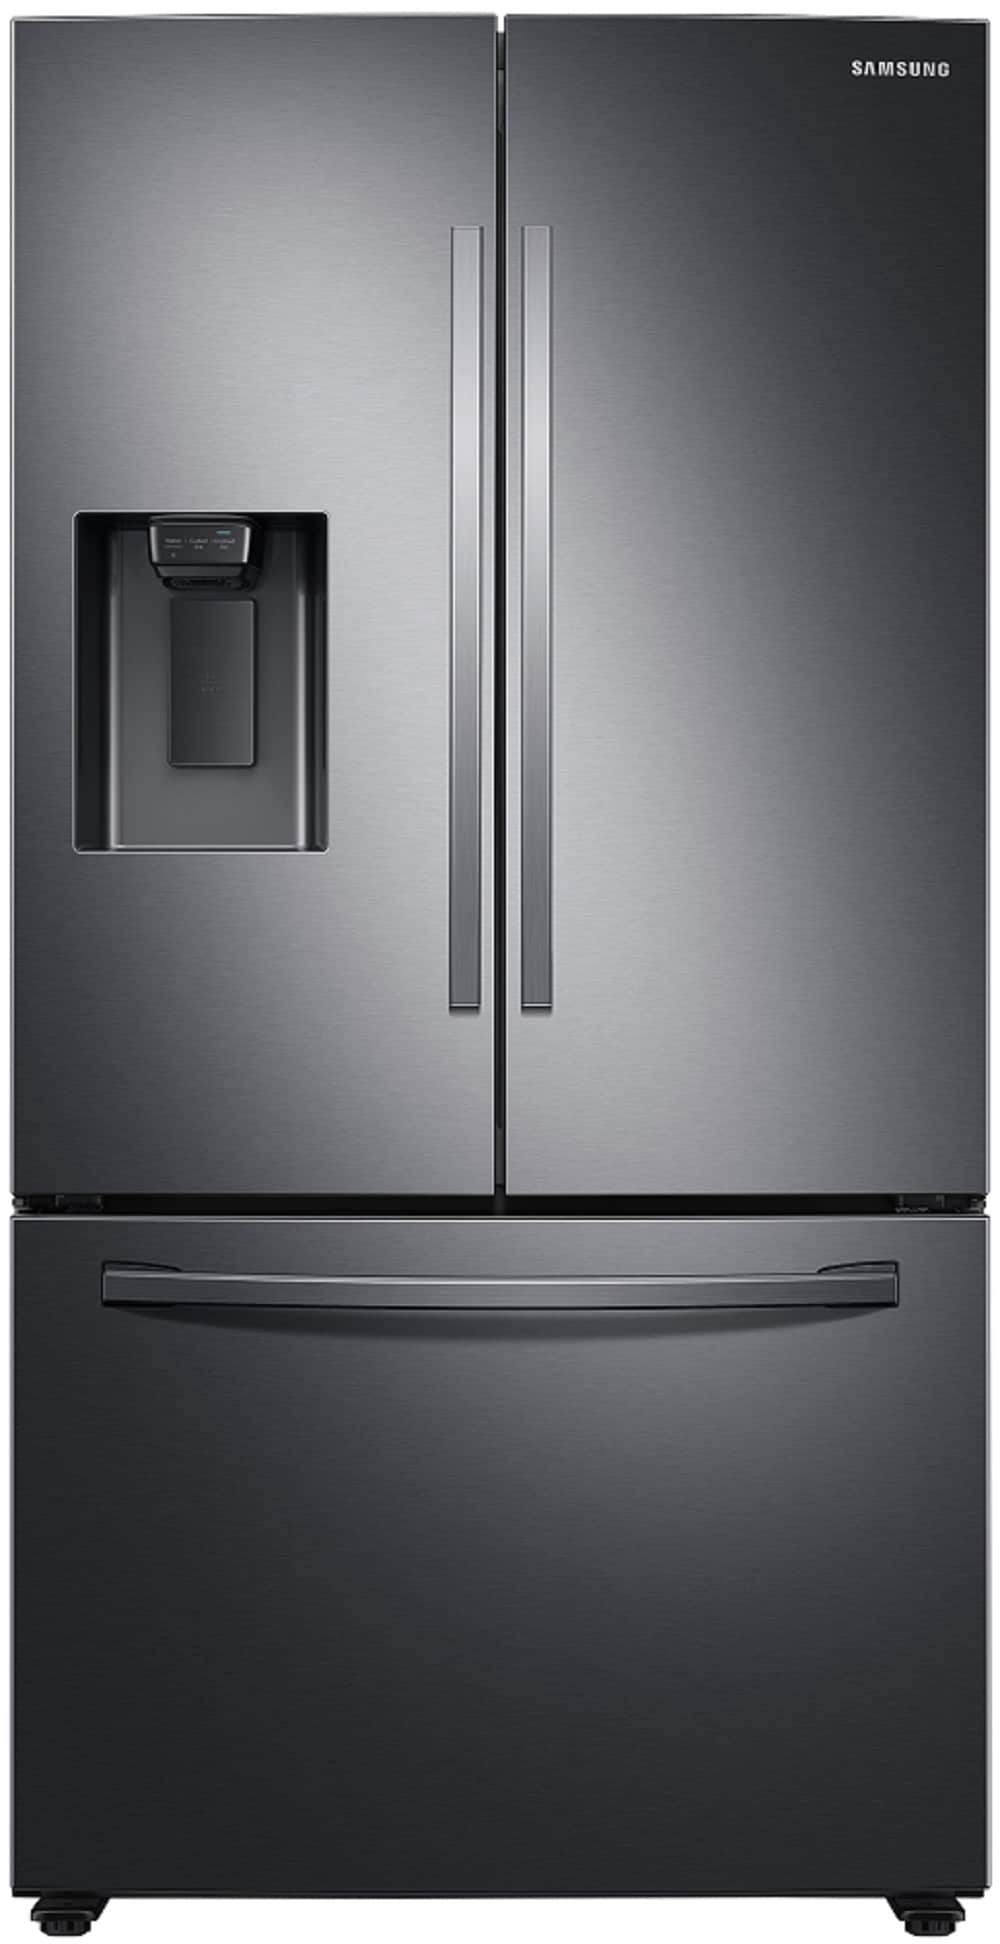 Samsung 27 Cu Ft French Door Refrigerator With Dual Ice Maker Fingerprint Resistant Black Stainless Steel Energy Star In The French Door Refrigerators Department At Lowes Com